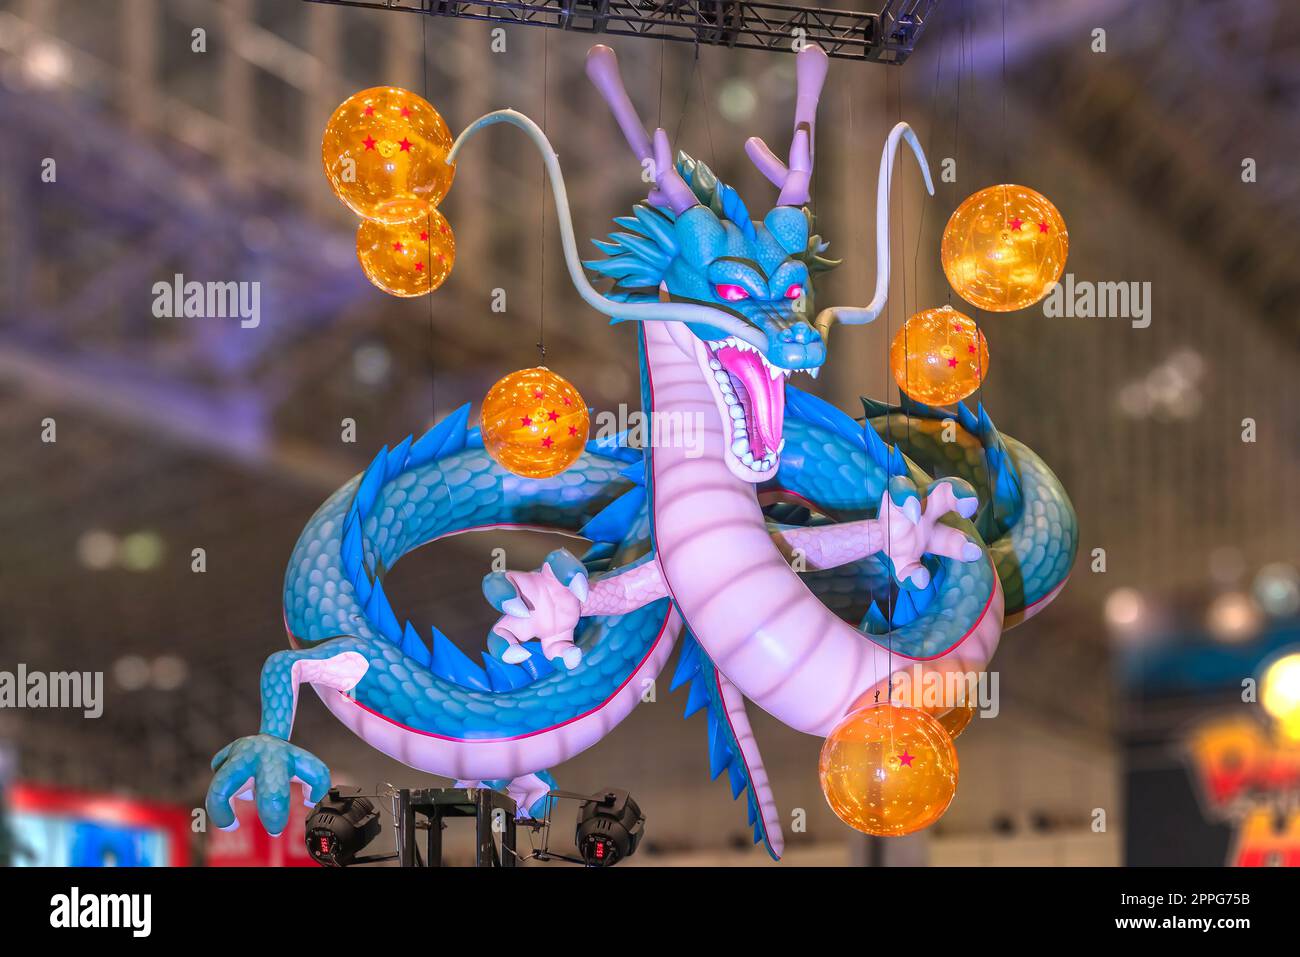 chiba, japan - december 22 2018: Huge inflatable structure depicting the dragon Shenron from the anime and manga serie of Dragon Ball floating under the ceiling of the anime convention Jump Festa 19. Stock Photo